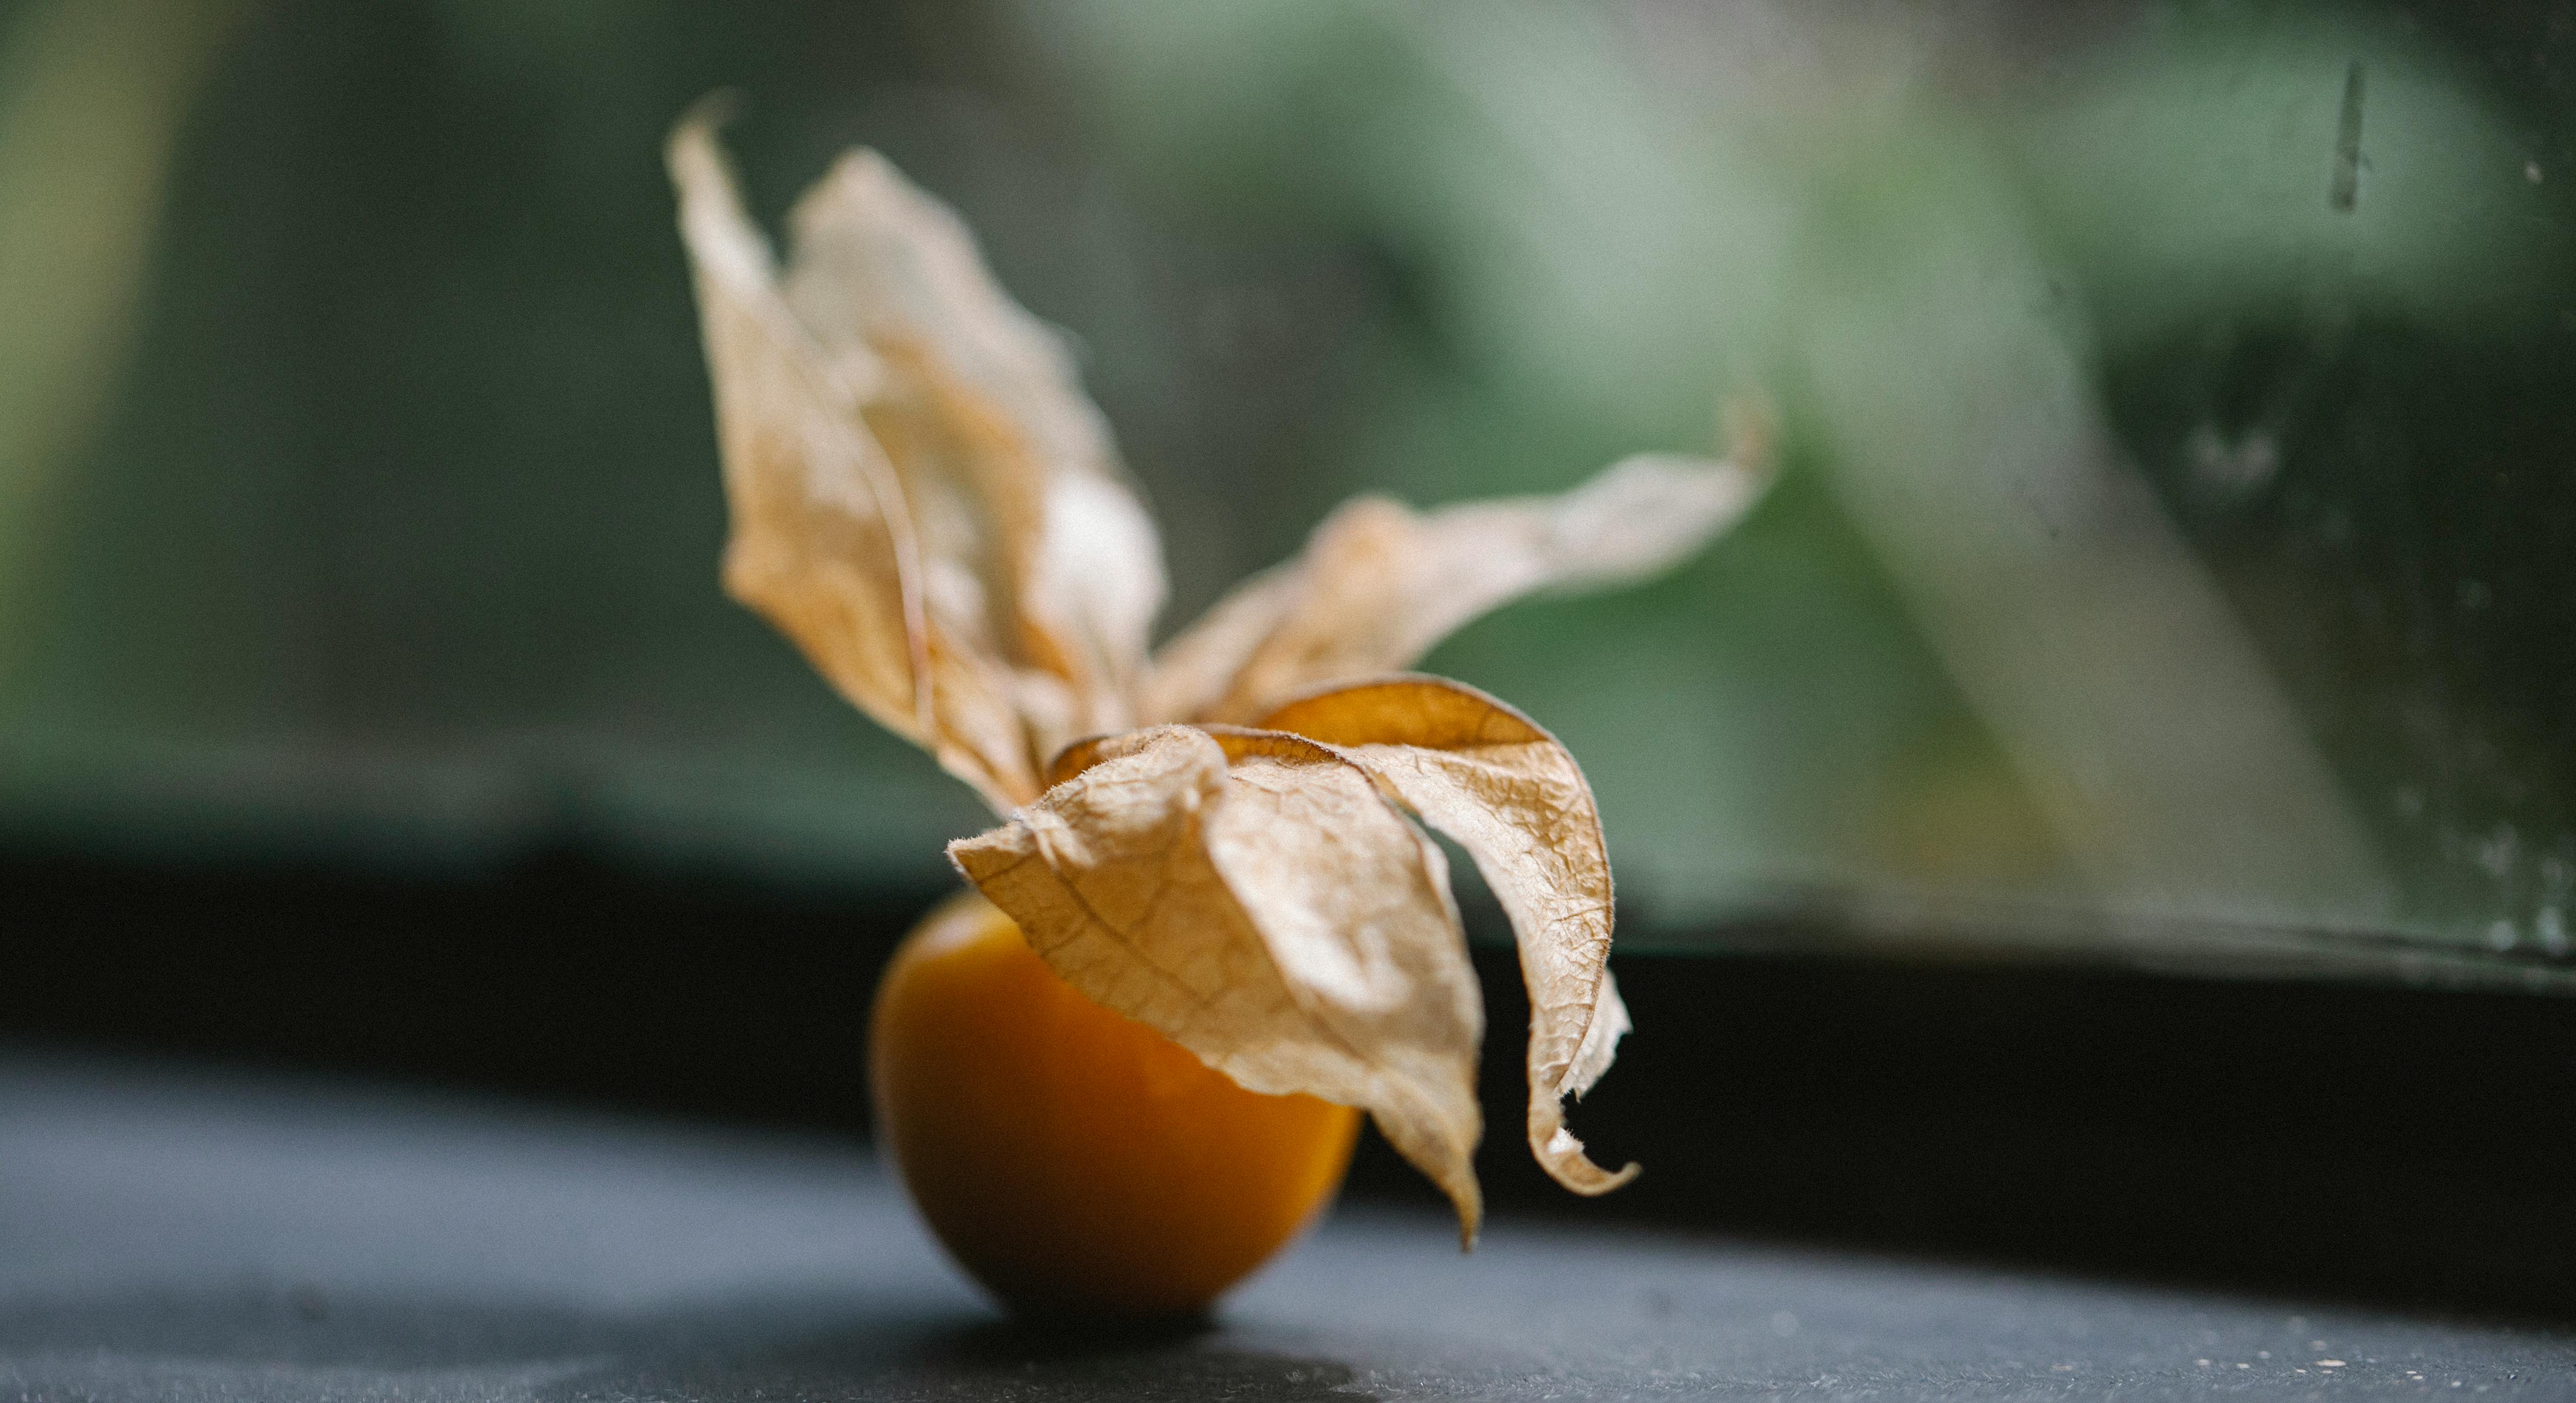 fruit of physalis on table